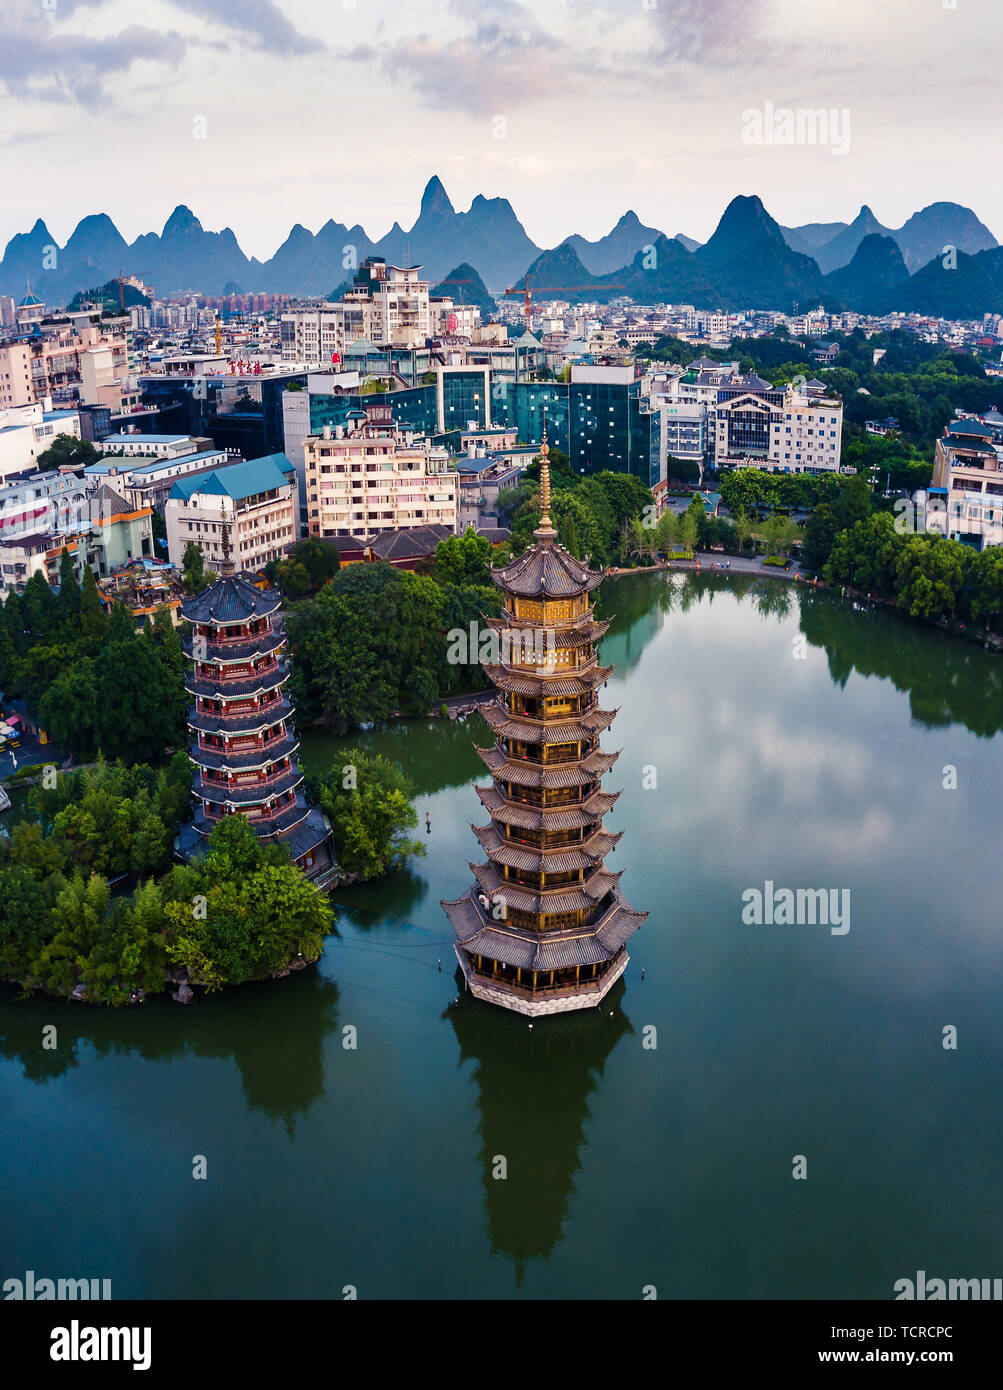 Guilin Park Twin Pagodas in Guangxi province of China Aerial View Stock Photo